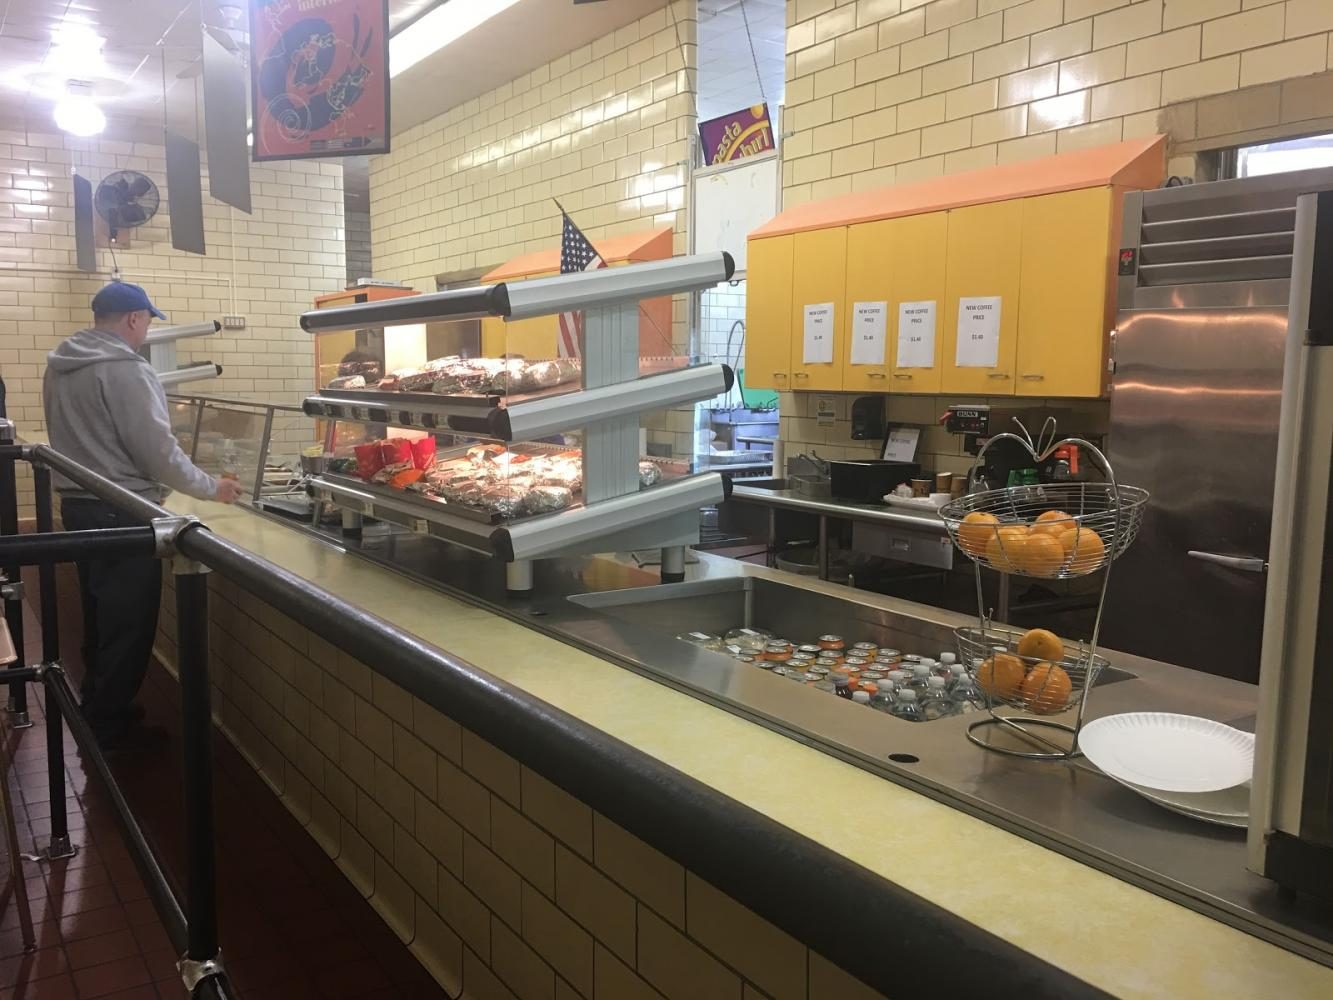 The cafeteria lunch line where all of the merchandise is held. Lantieris office, where he monitors the line, is behind the counter, out of frame.